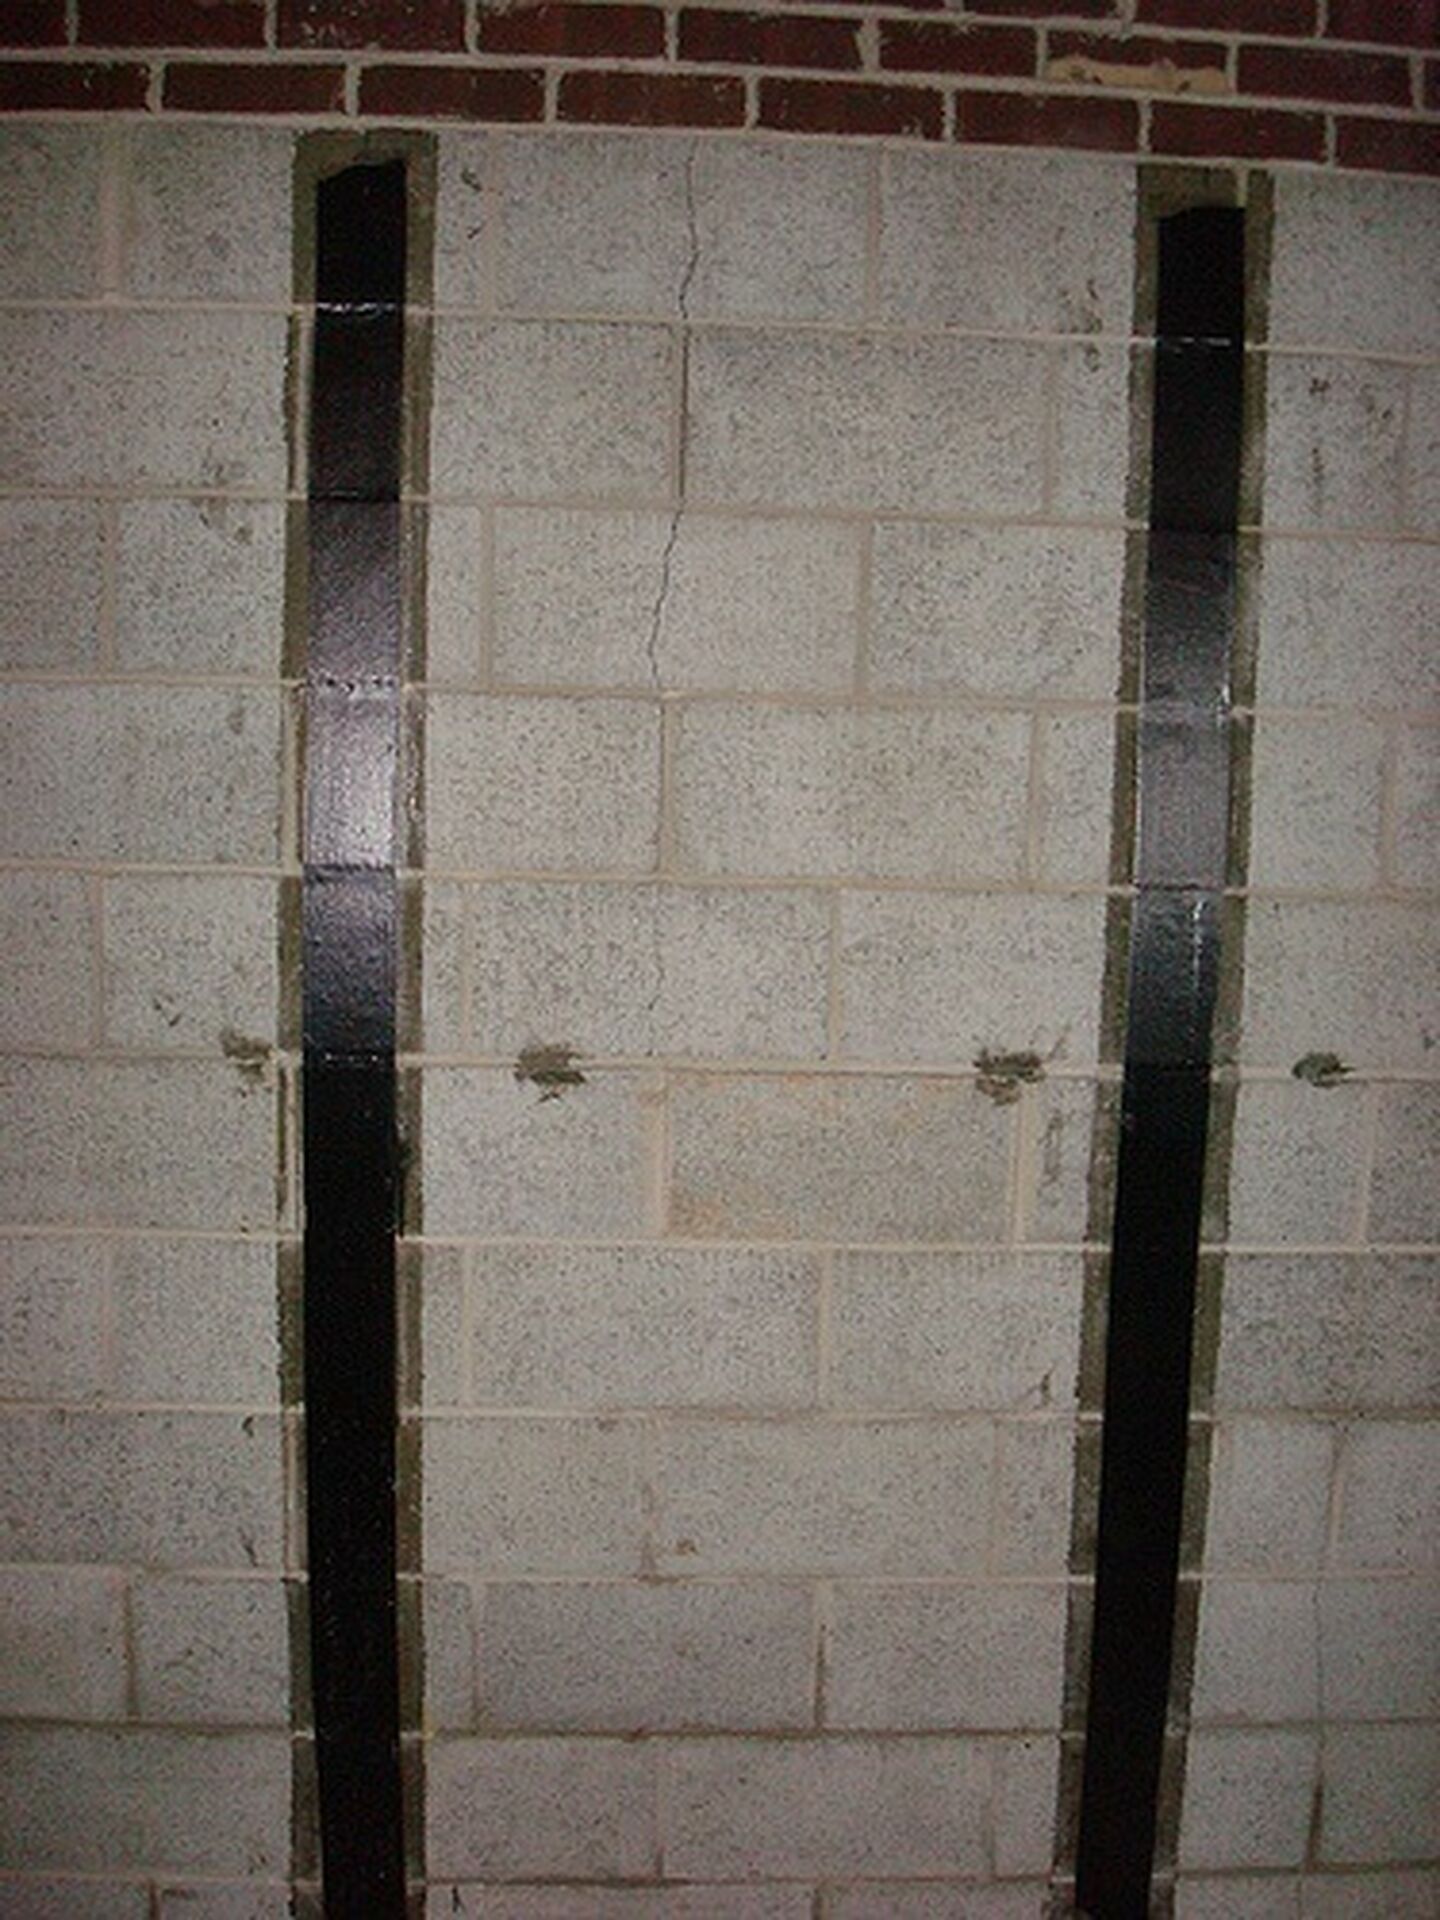 Carbon Fiber vs. Steel – What’s the Best Structural Foundation Repair?